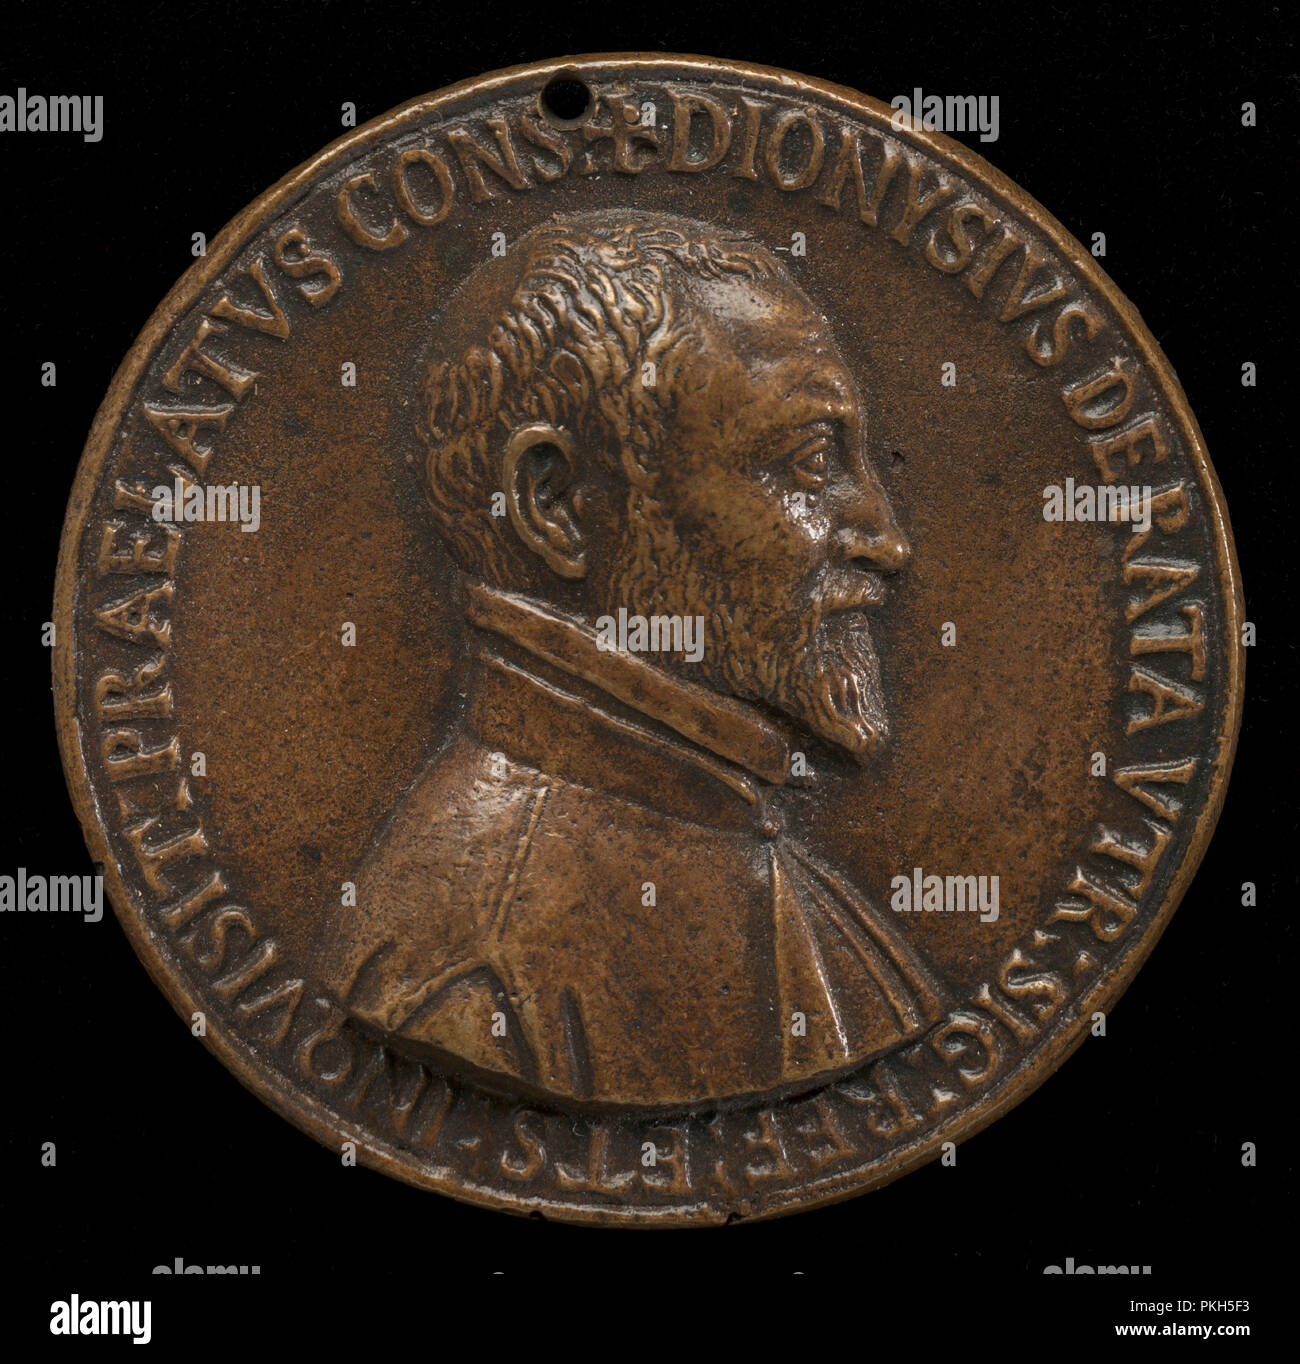 Dionisio Ratta of Bologna, died 1597 [obverse]. Dated: 1592. Dimensions: overall (diameter): 6.71 cm (2 5/8 in.)  gross weight: 122.05 gr (0.269 lb.)  axis: 11:00. Medium: bronze. Museum: National Gallery of Art, Washington DC. Author: Felice Antonio Casone. Stock Photo